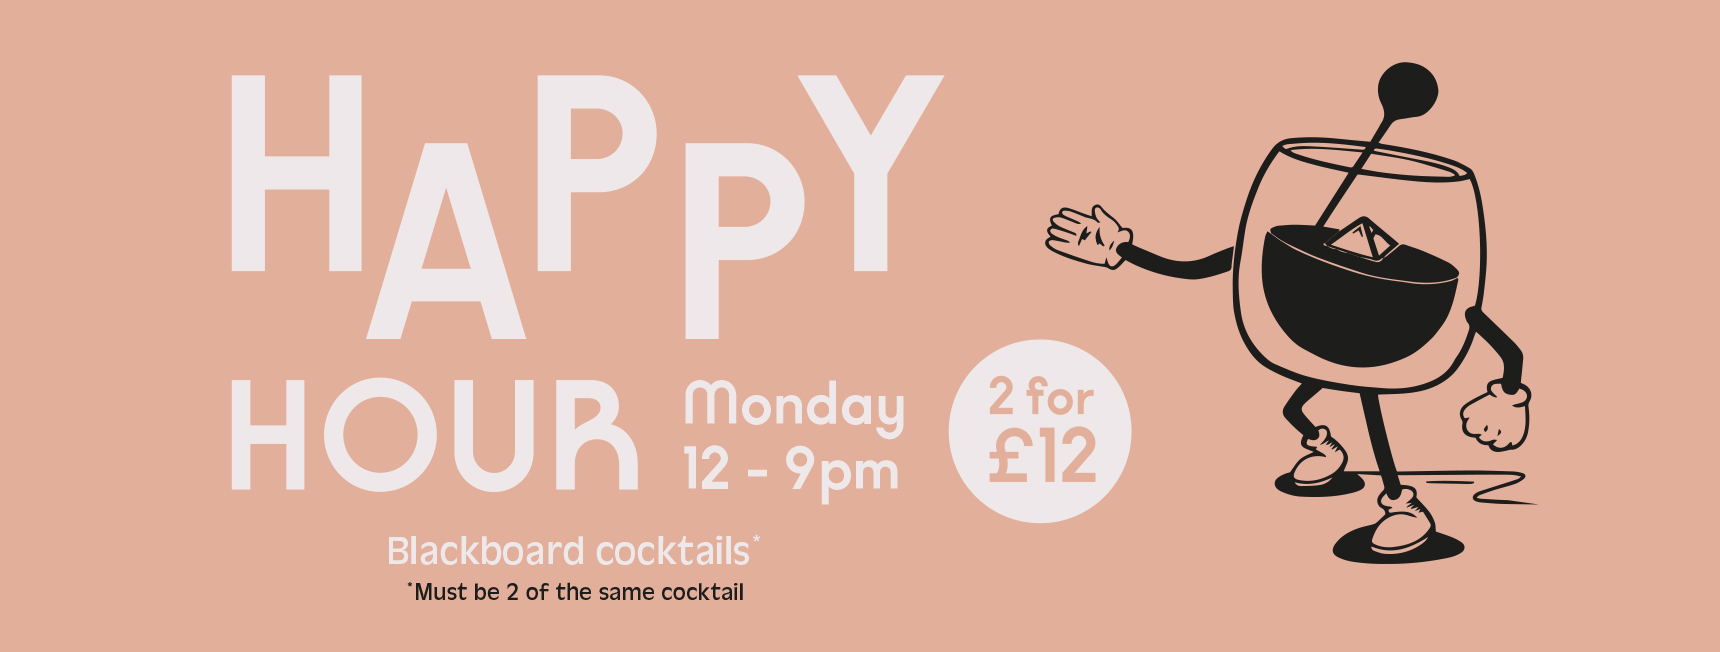 Happy Hour. Monday 12-9pm. 2 for £12 on all blackboard cocktails. Must be the same 2 cocktails.